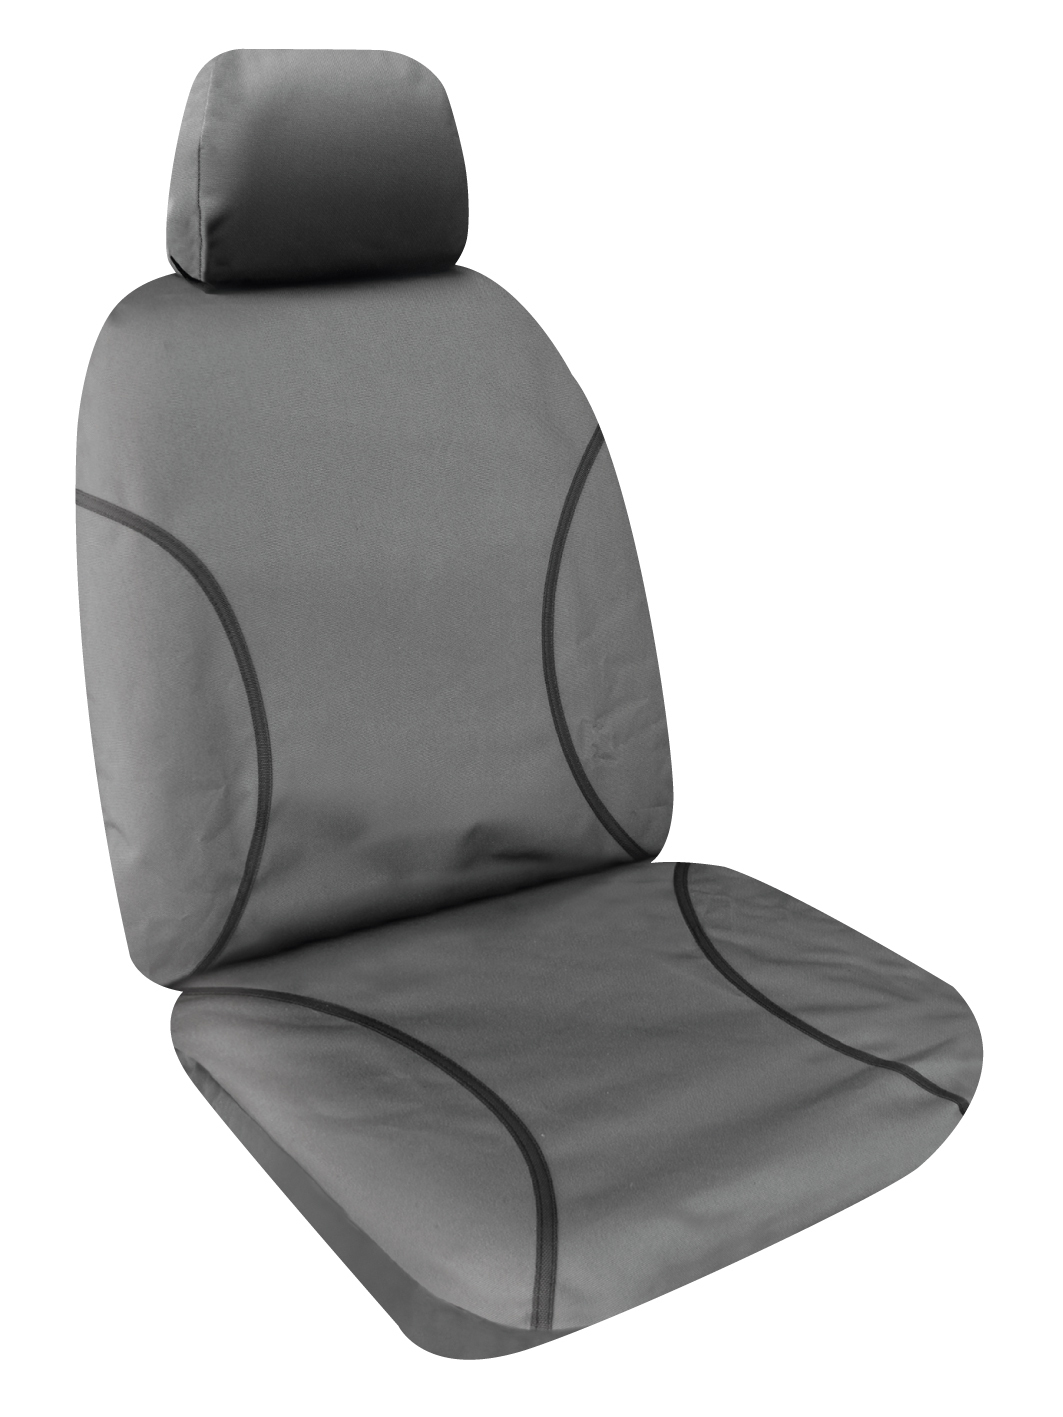 SPERLING SEAT COVER REAR TRG (TRADIES CANVAS GREY)